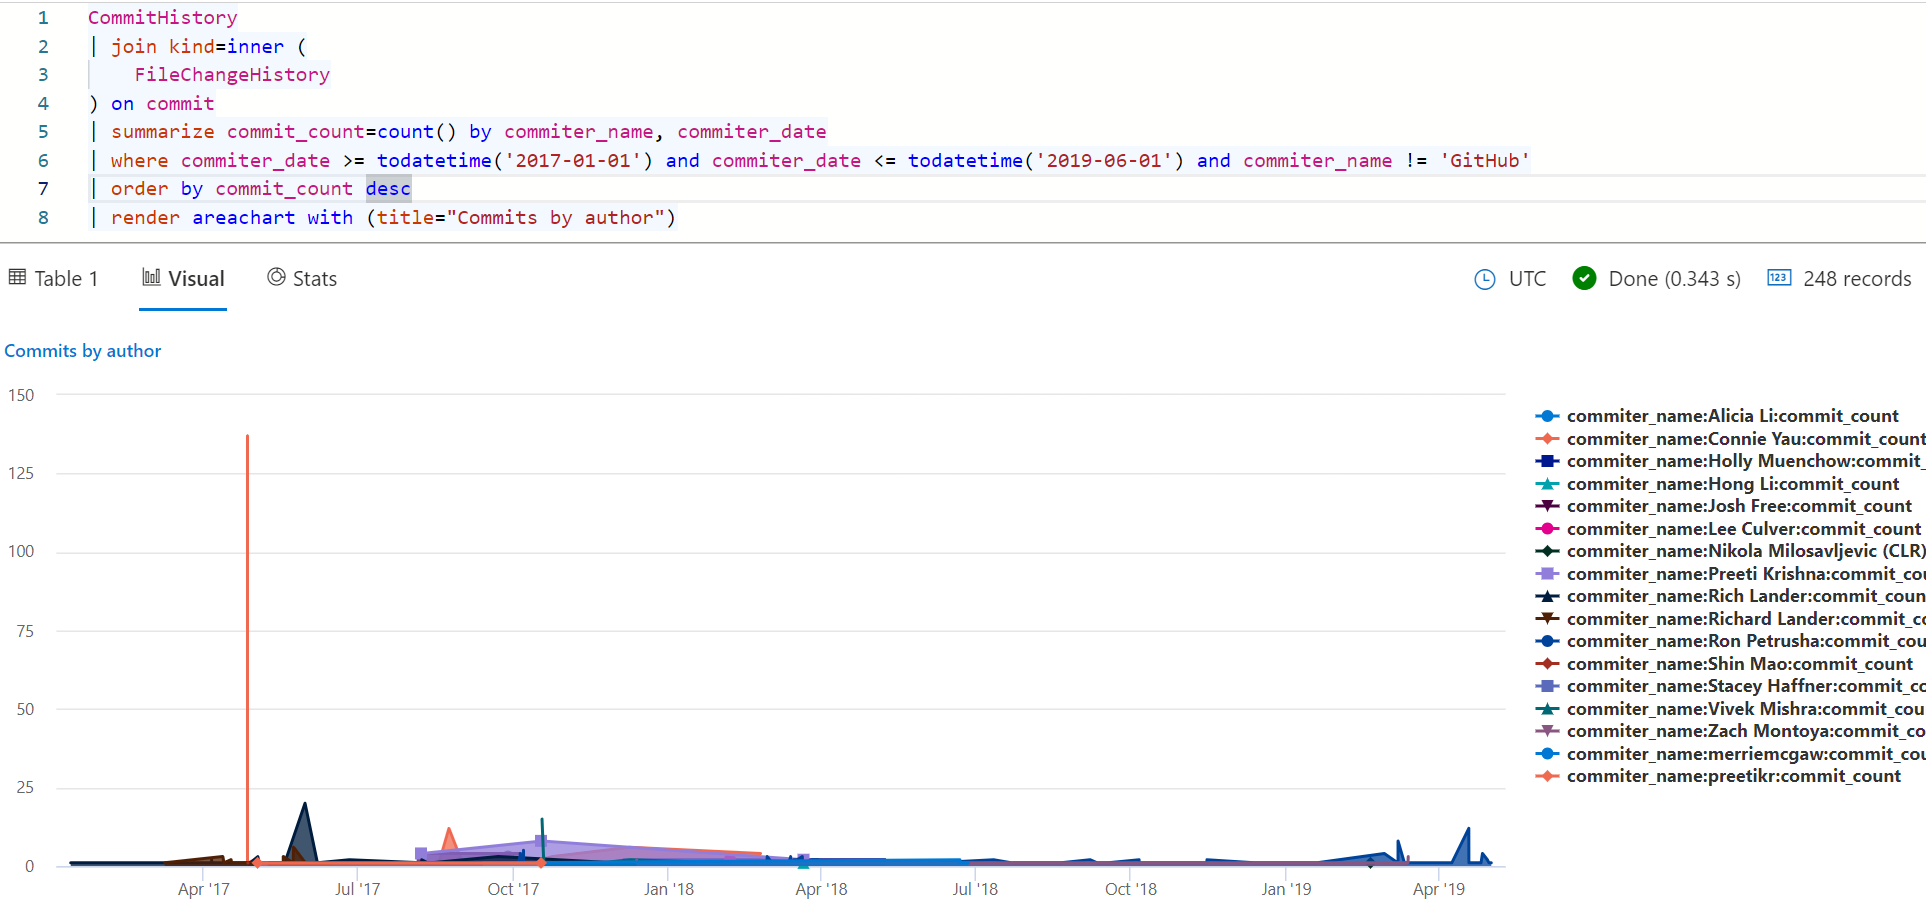 Commits by user over time!